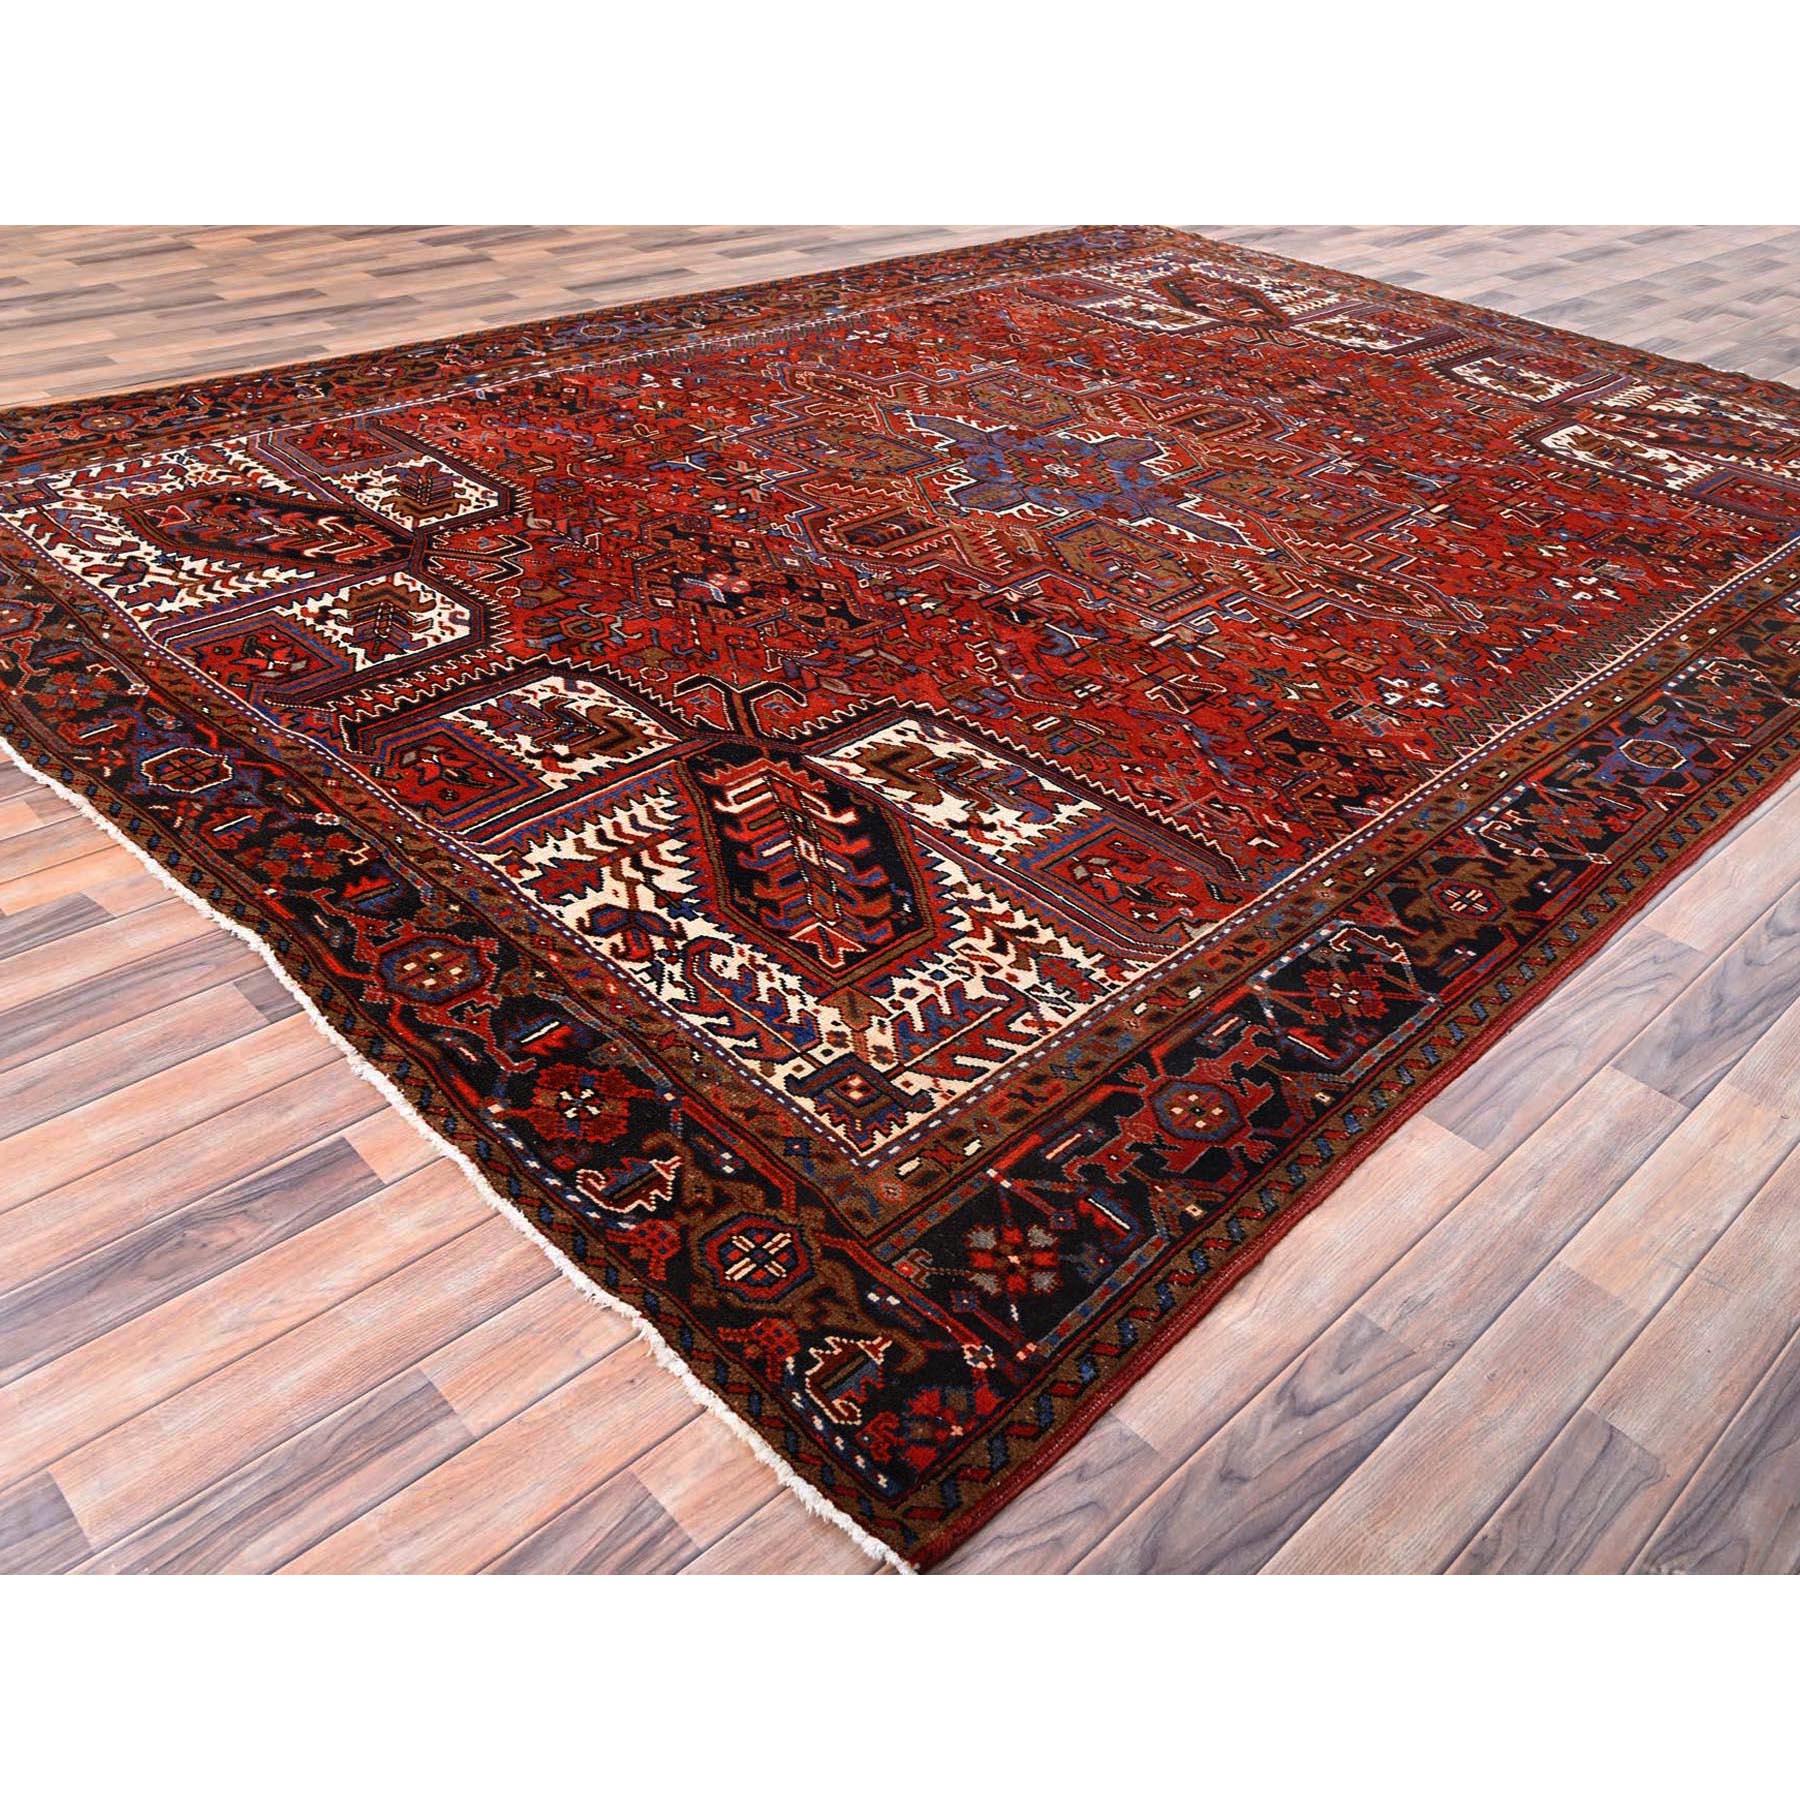 Red Semi Antique Persian Heriz Good Cond Rustic Feel Worn Wool Hand Knotted Rug In Good Condition For Sale In Carlstadt, NJ